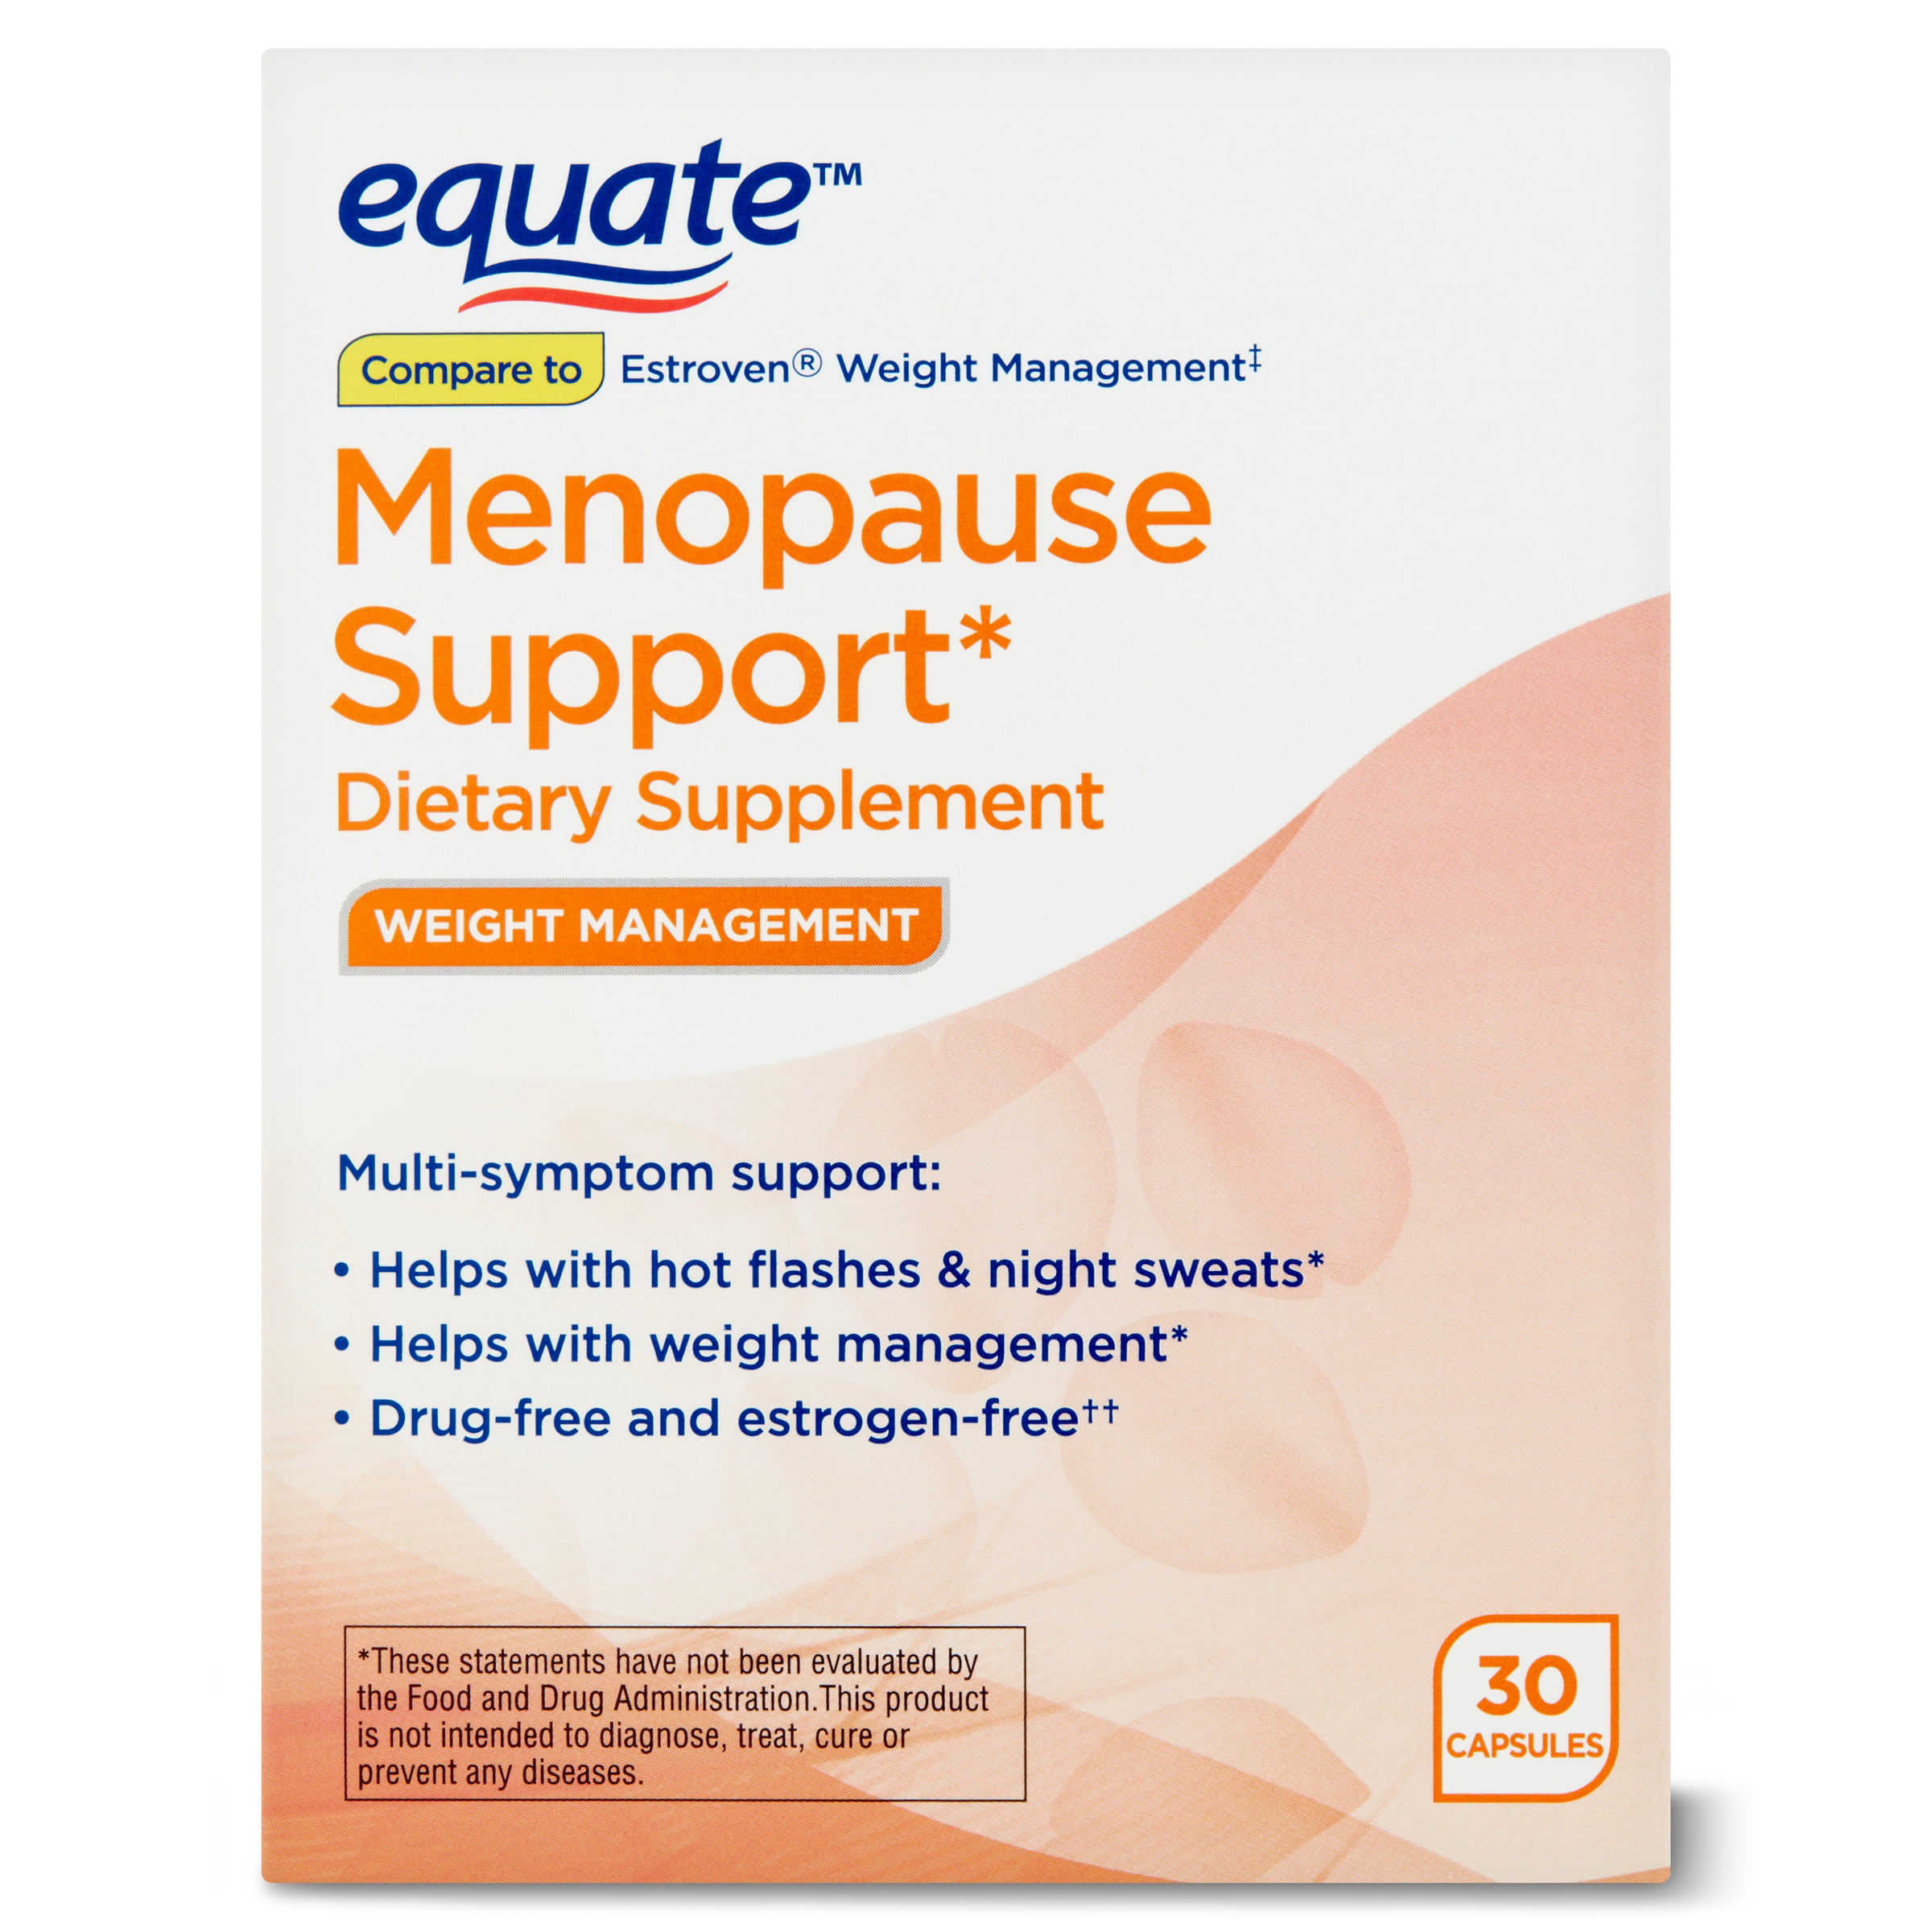 Equate Menopause Support Weight Management Dietary Supplement, 30 count